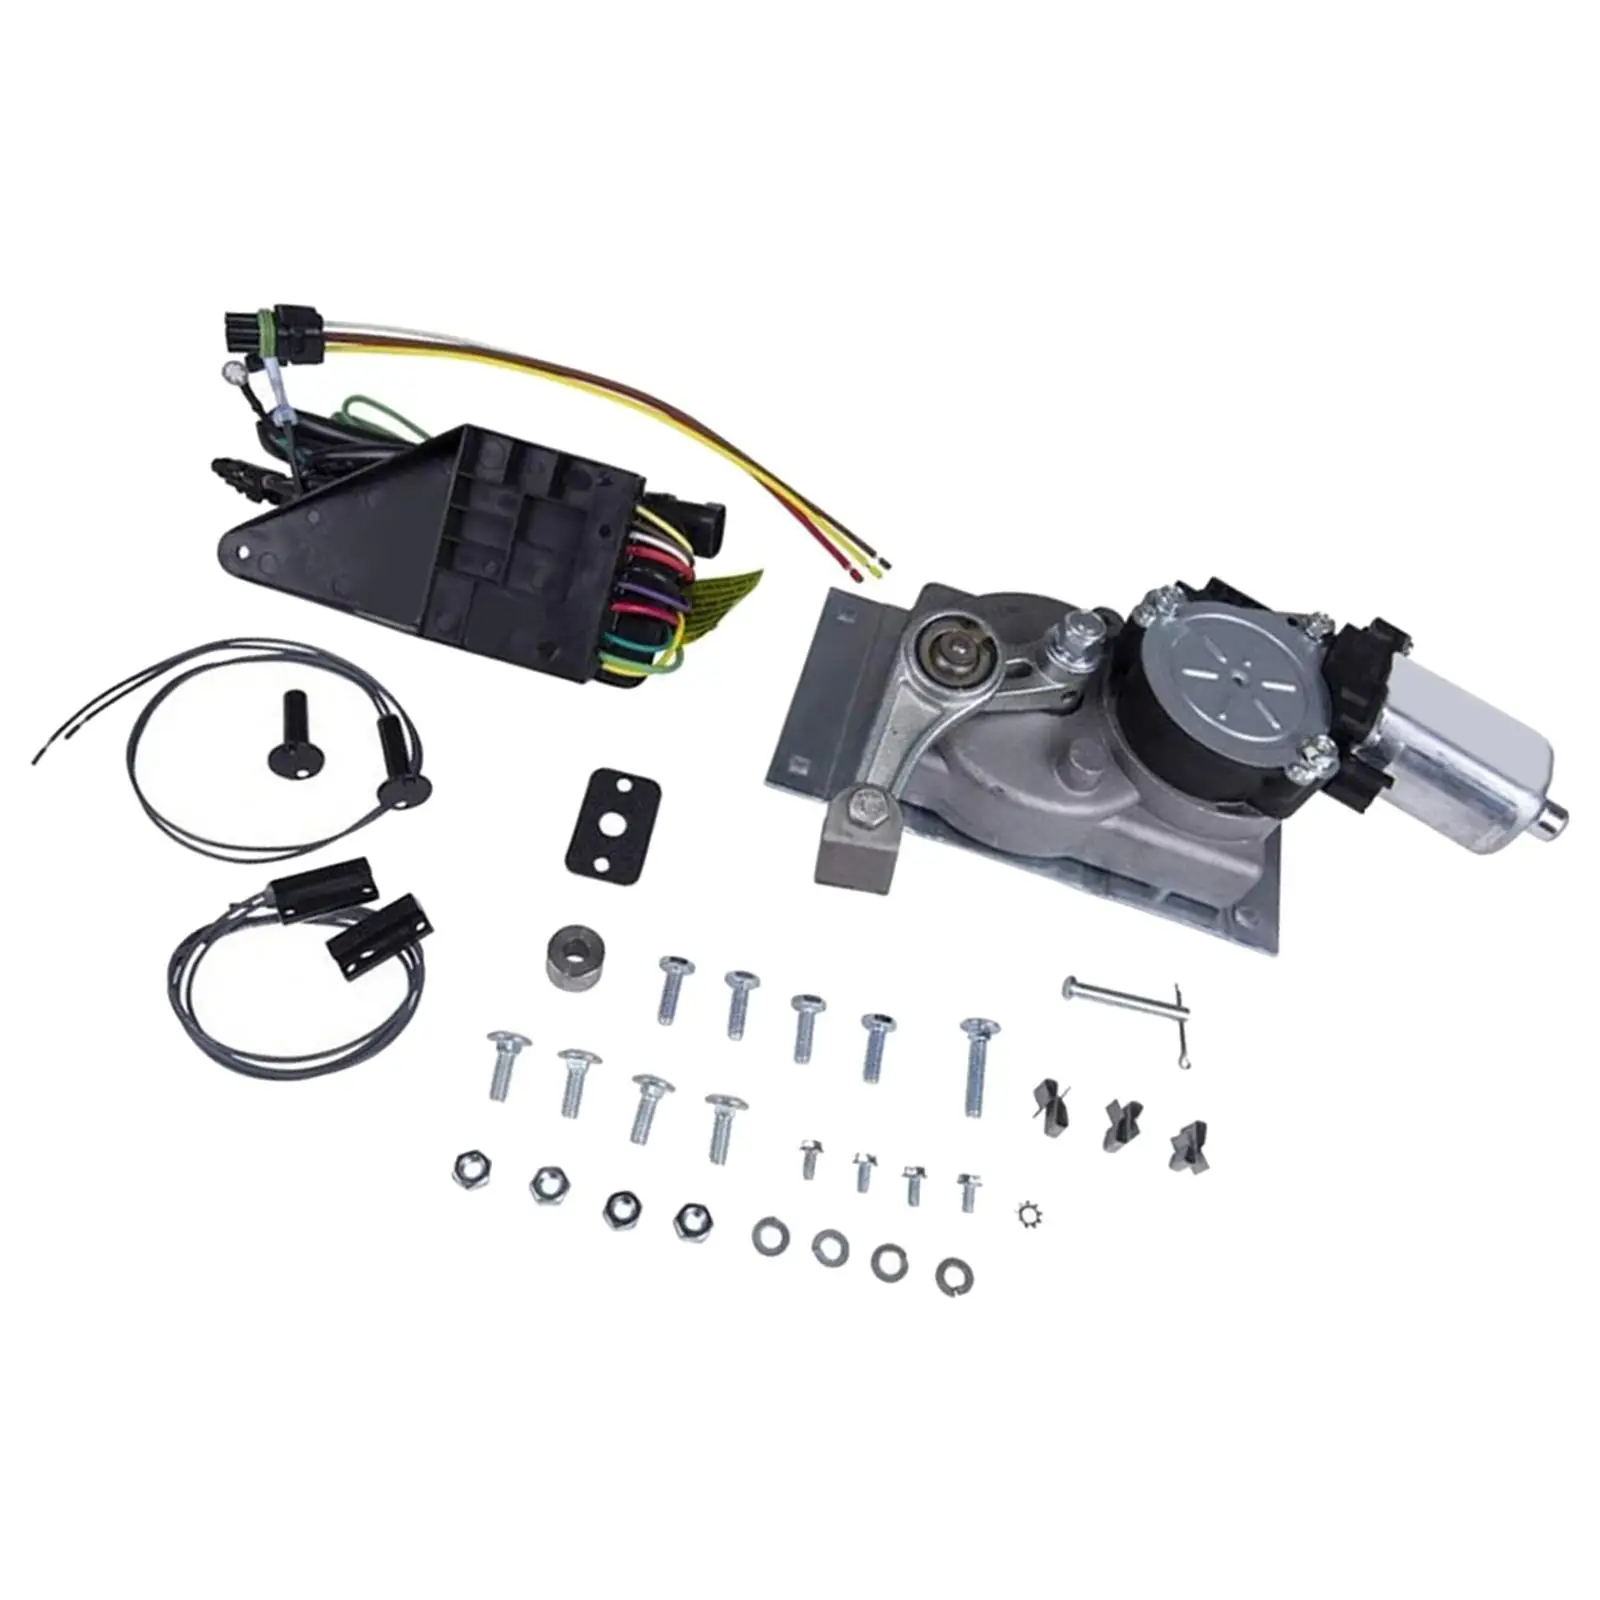 RV Trailer Step Motor Conversion Kit Car Accessories 379769 for Transport Vehicle Durable Convenient Installation Assembly